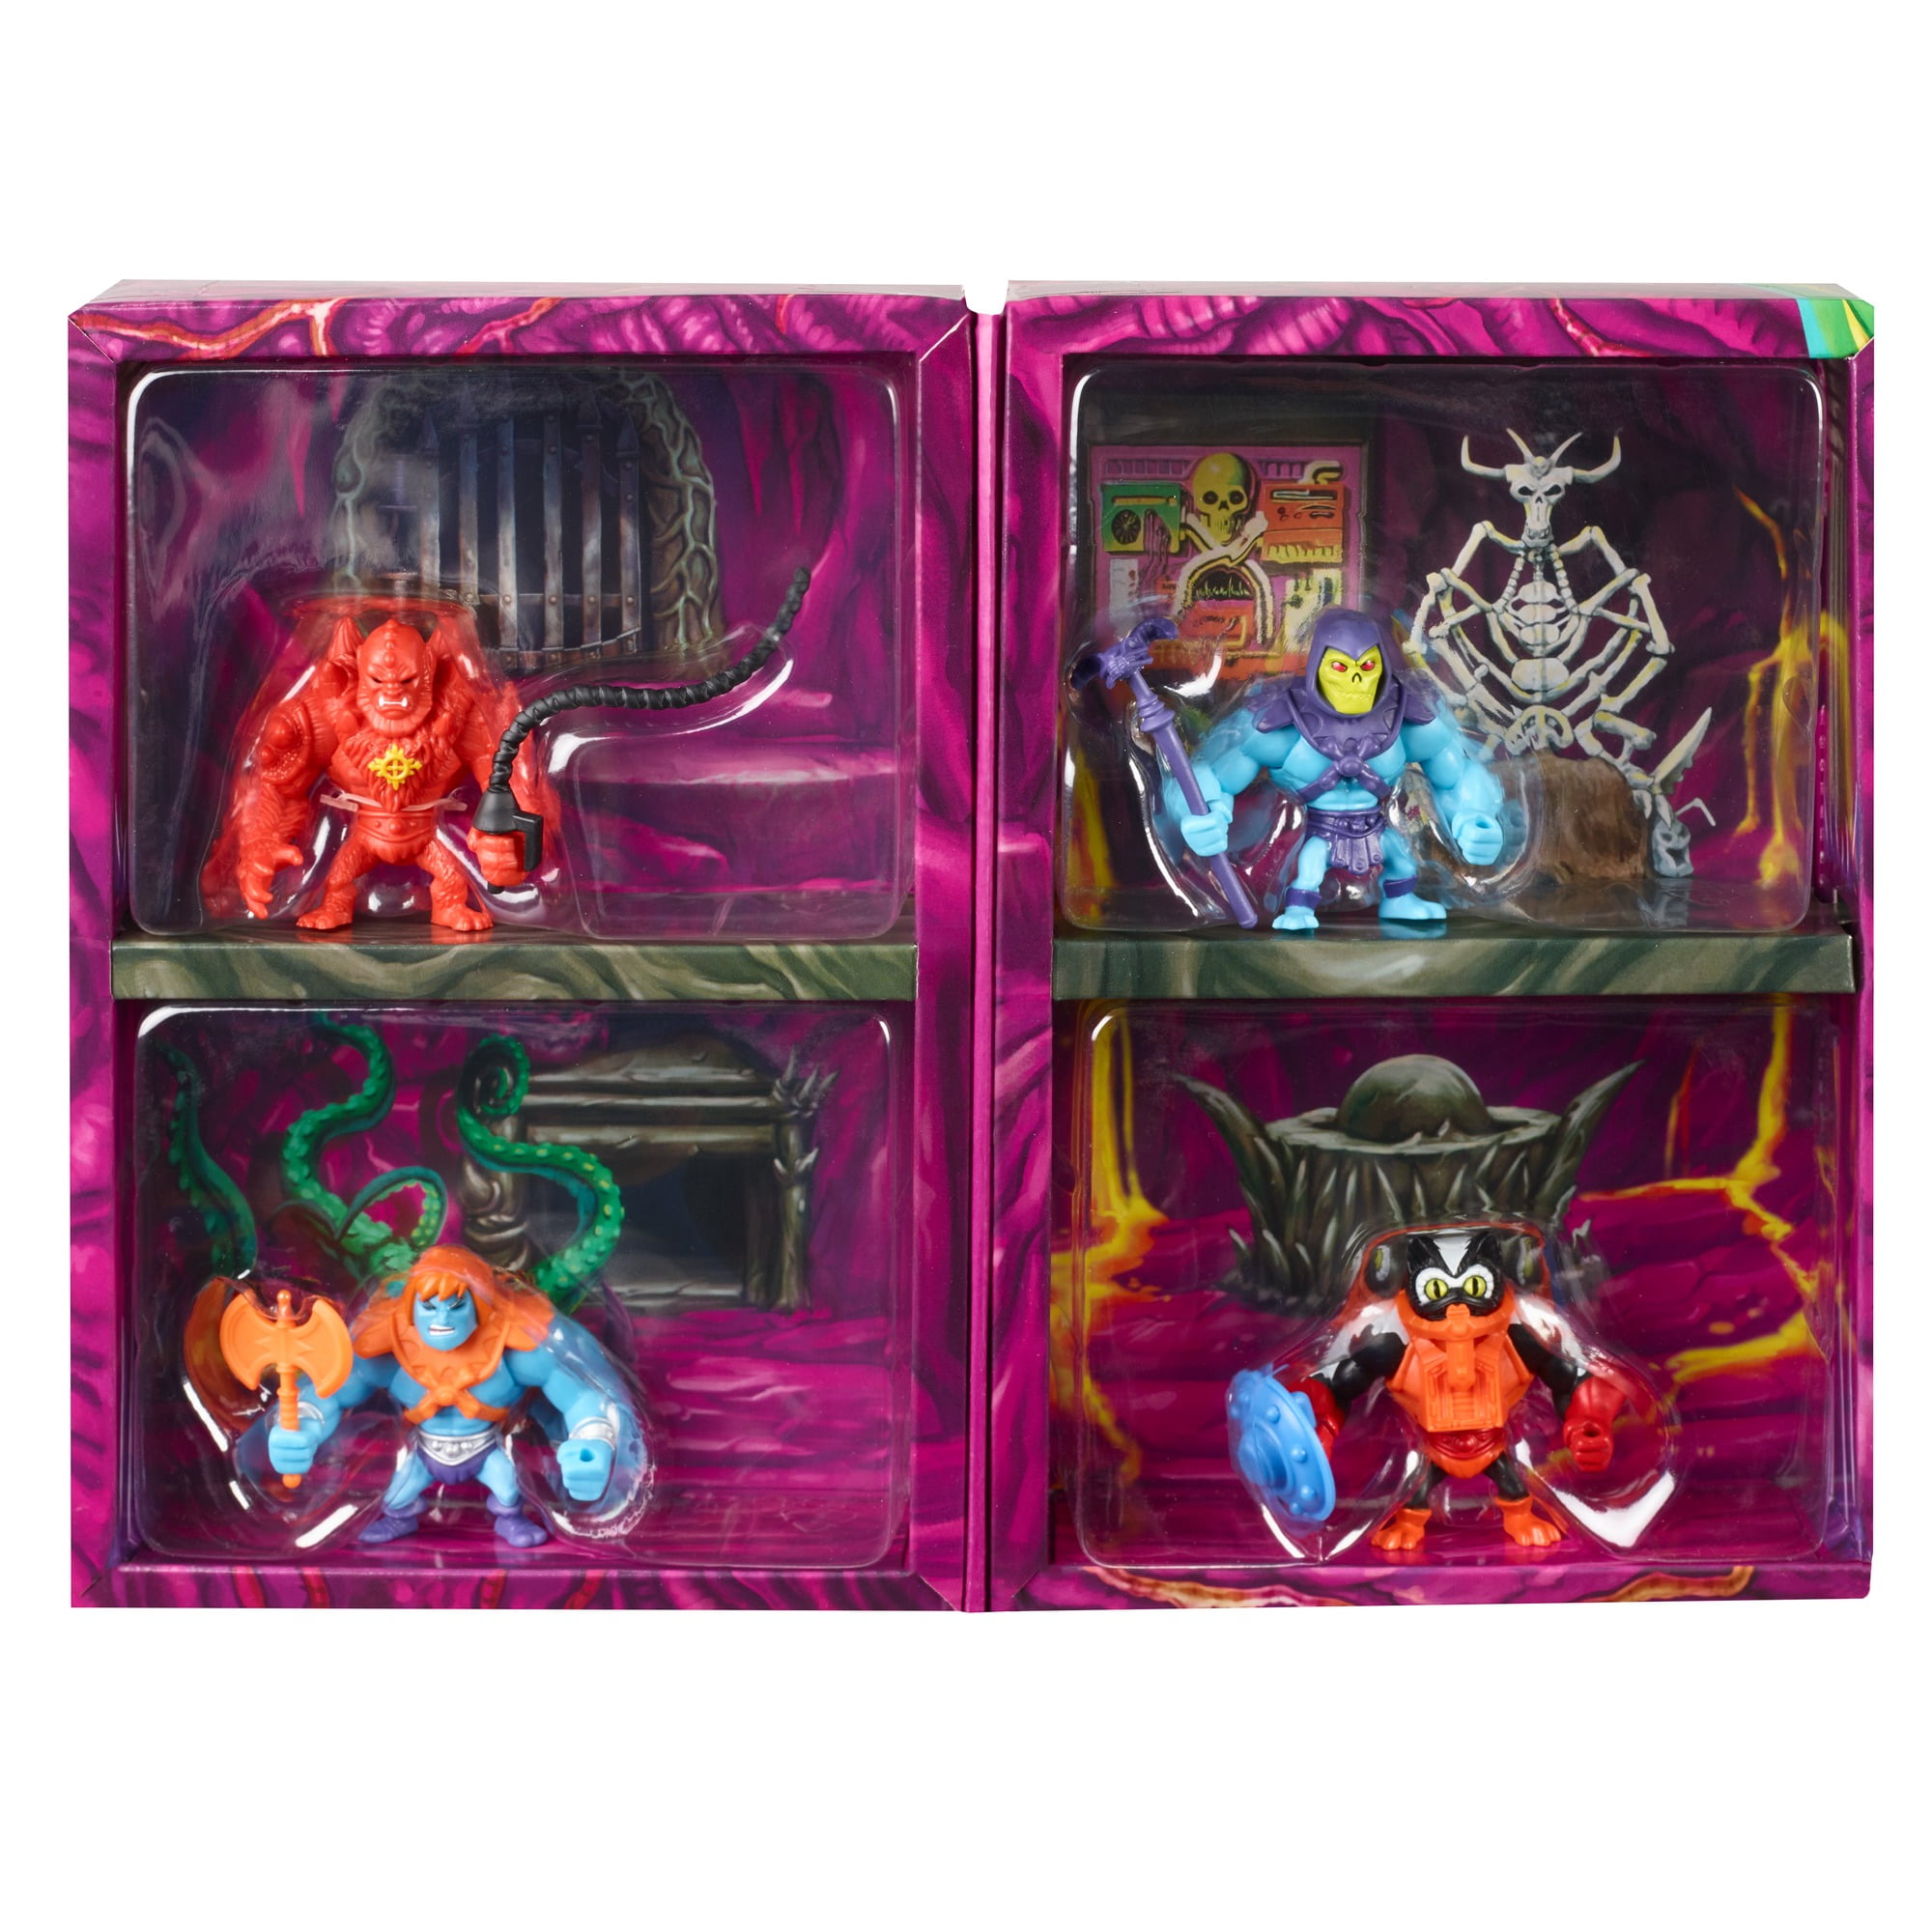 MASTERS OF THE UNIVERSE FAST SHIPPING ETERNIA MINIS PURPLE- ASSORTED 